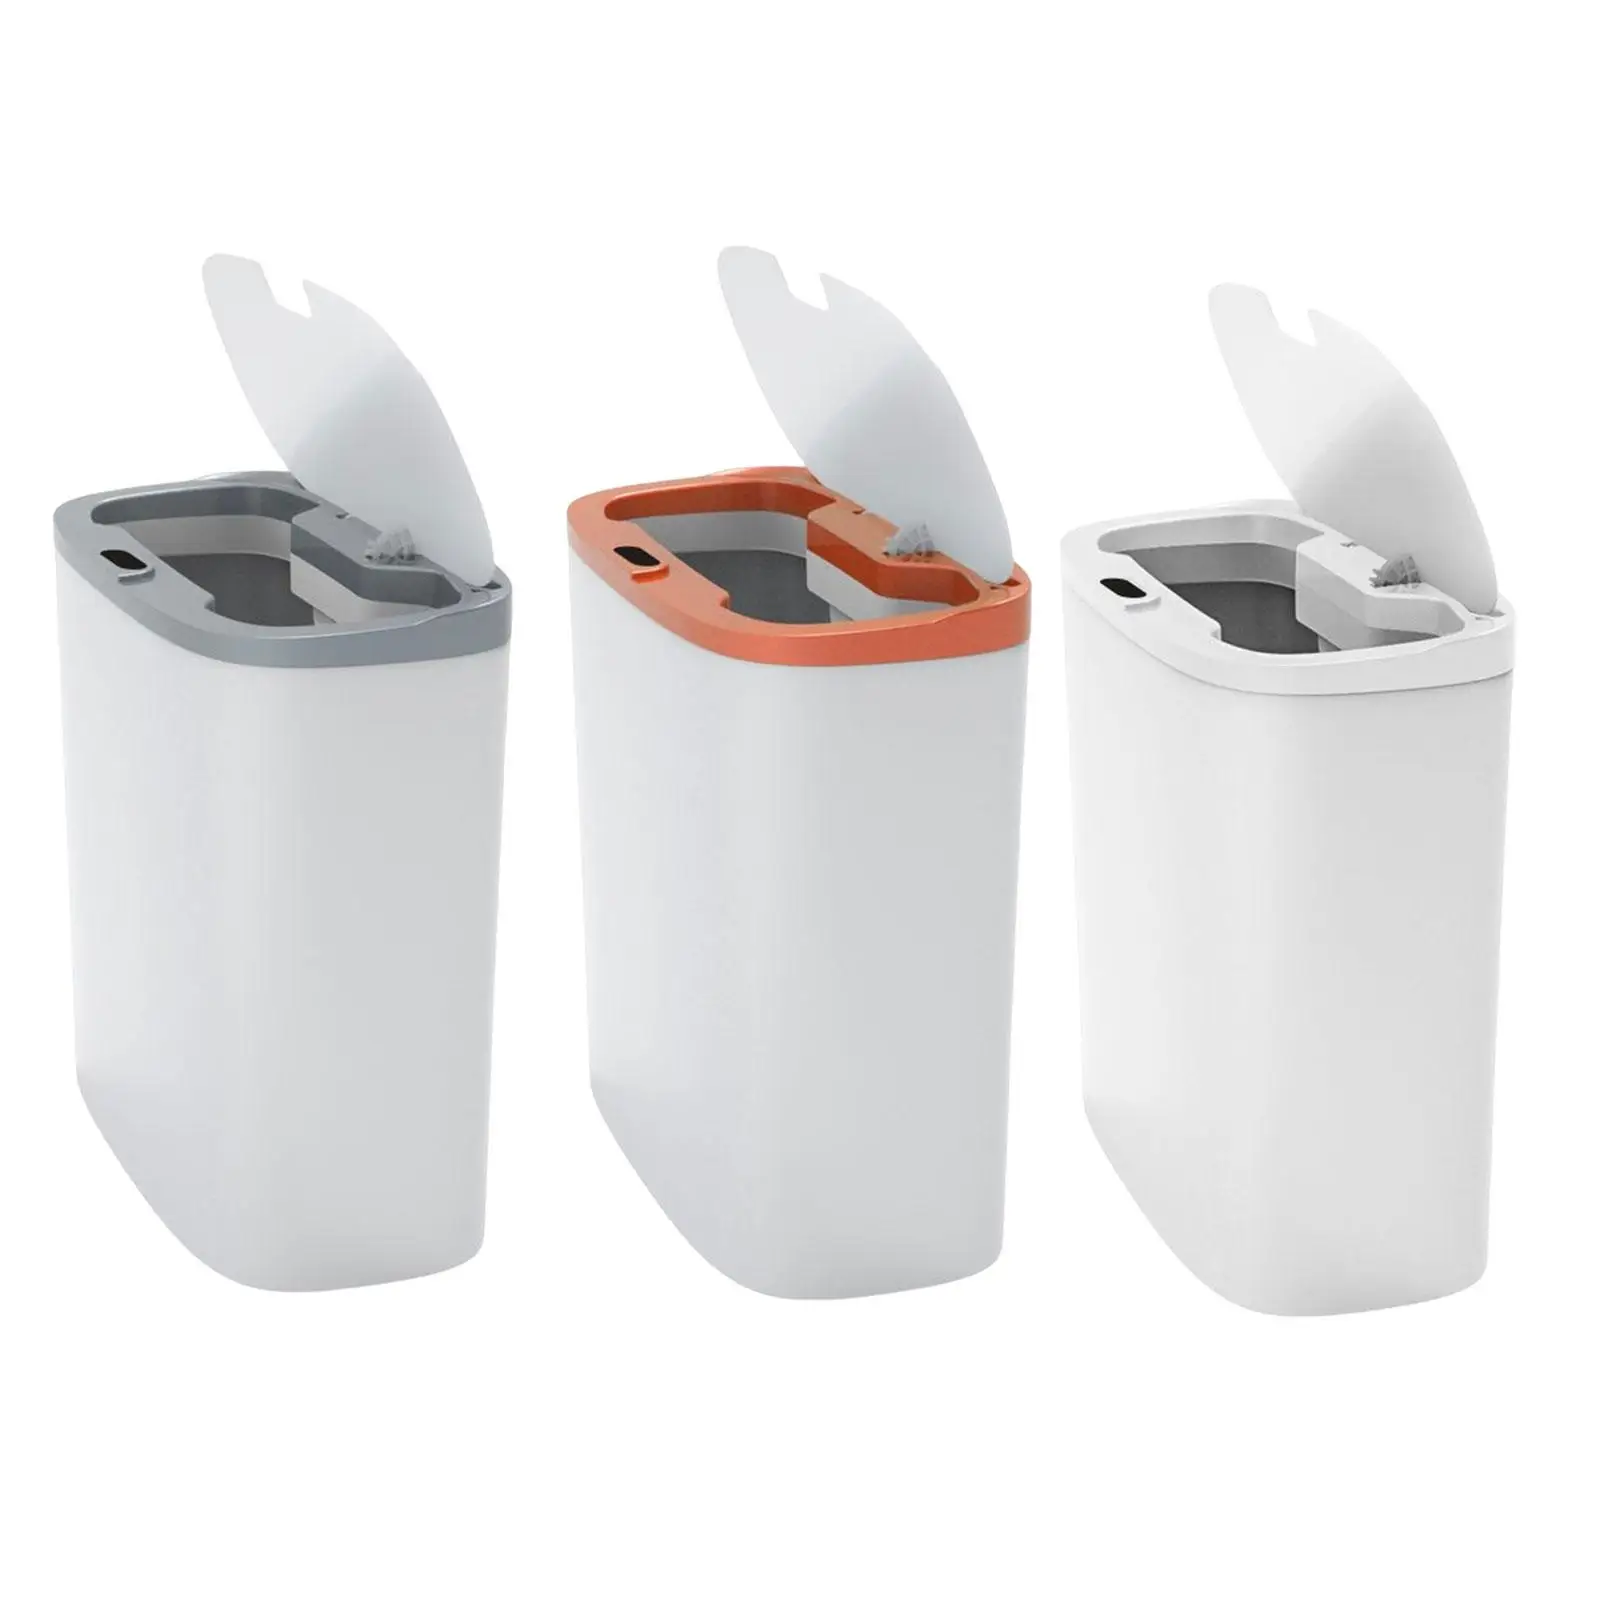 Automatic Intelligent Trash Can Touch Free 14L Capacity for Bathroom Office